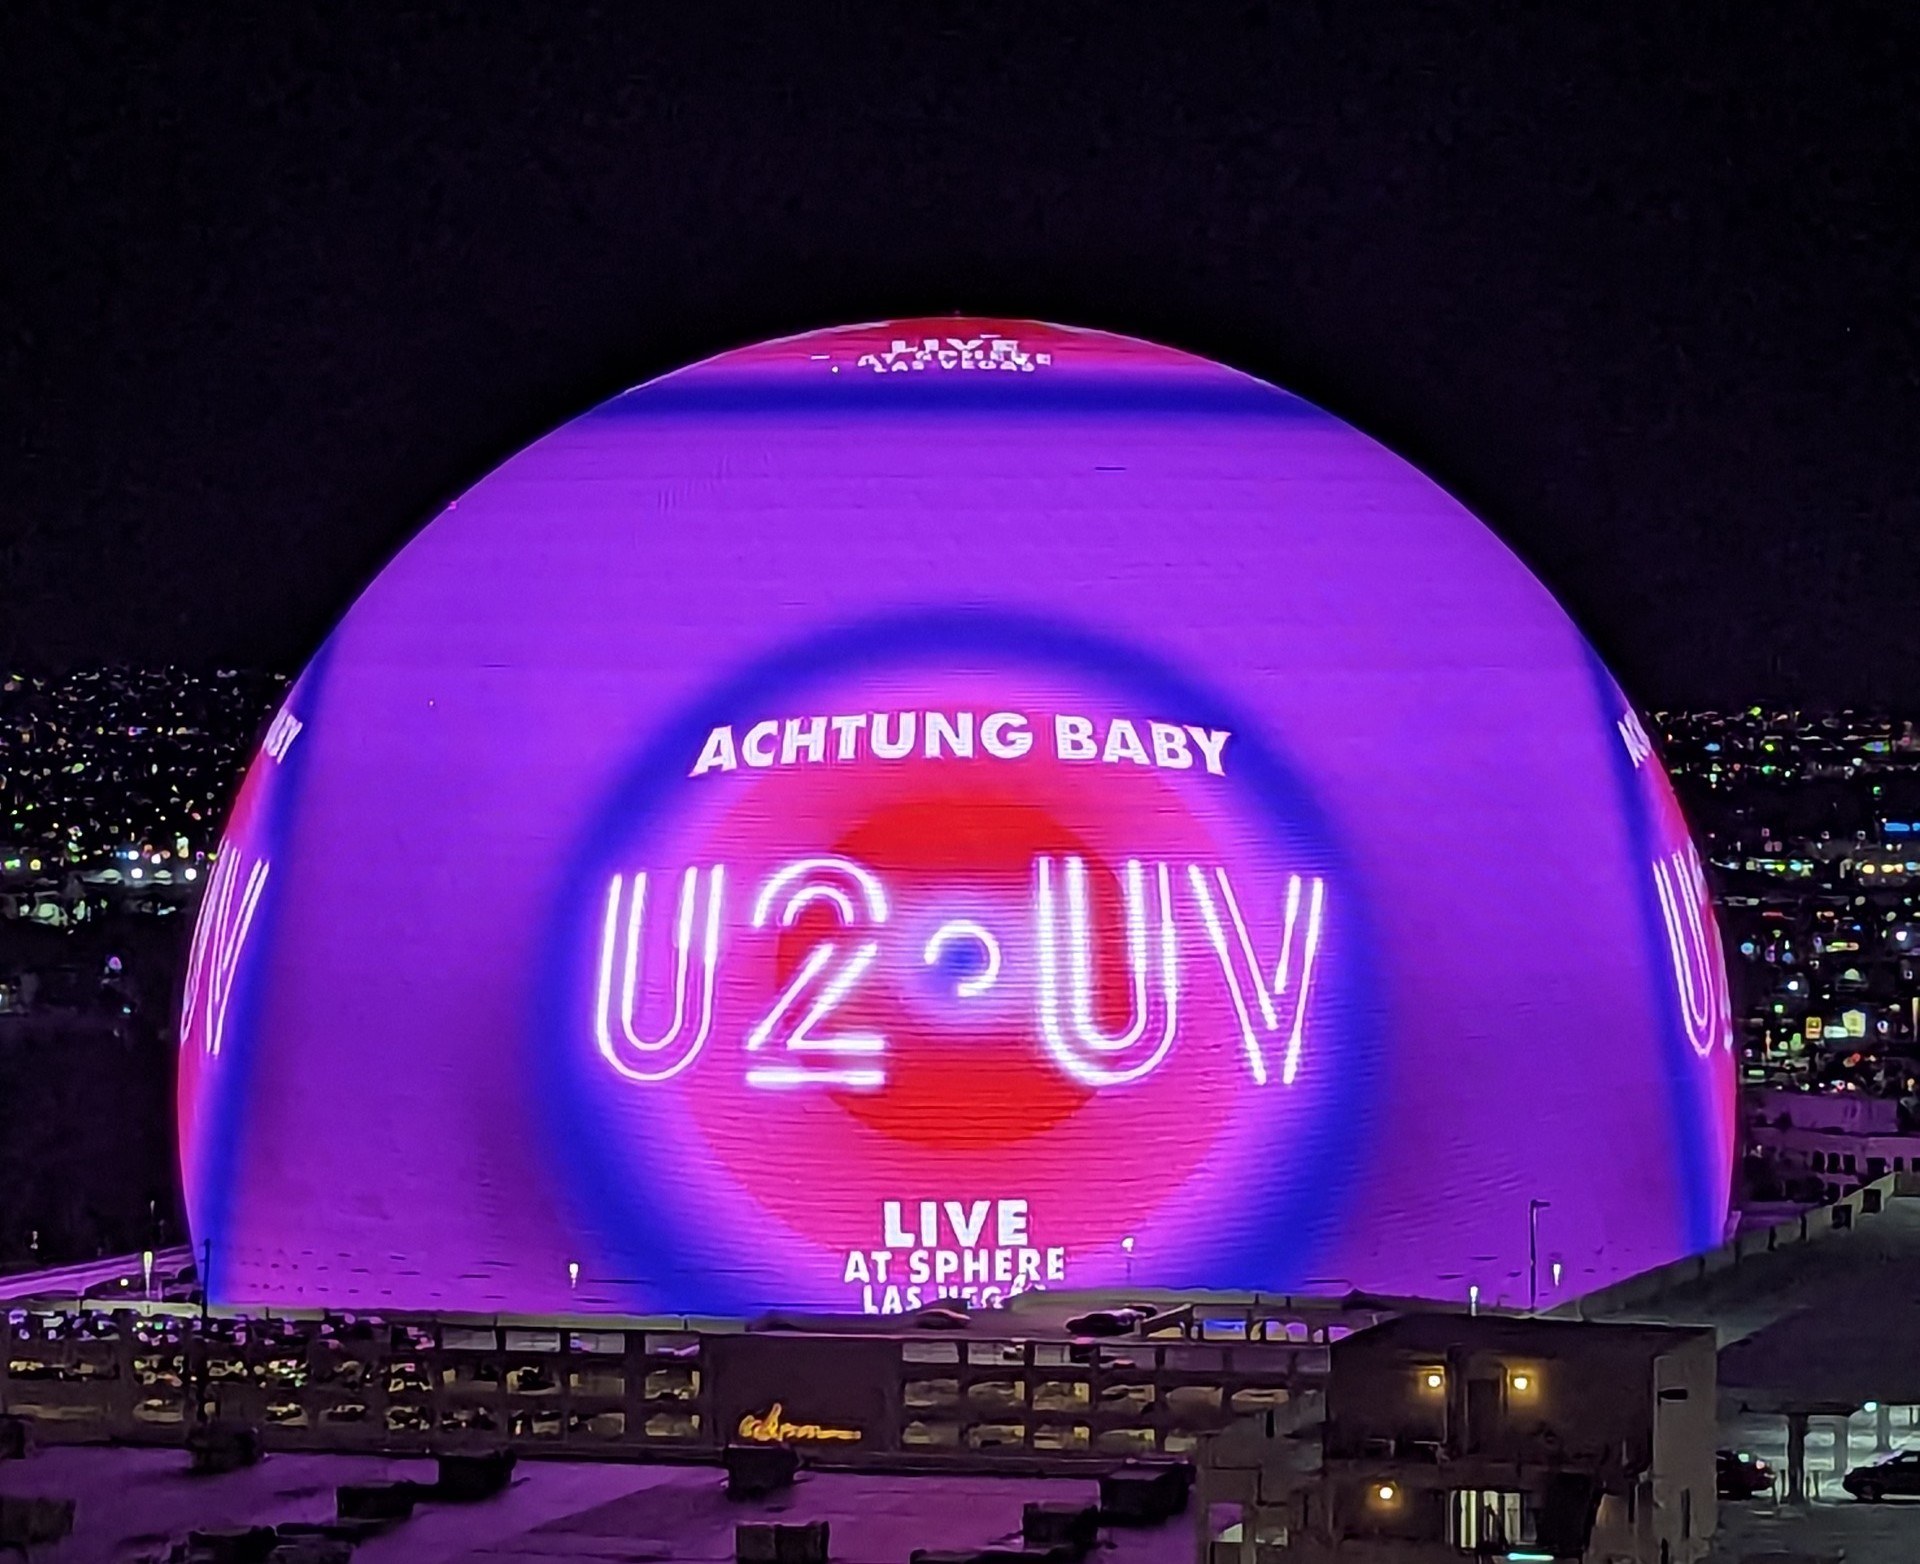 U2:UV Achtung Baby Live at Sphere